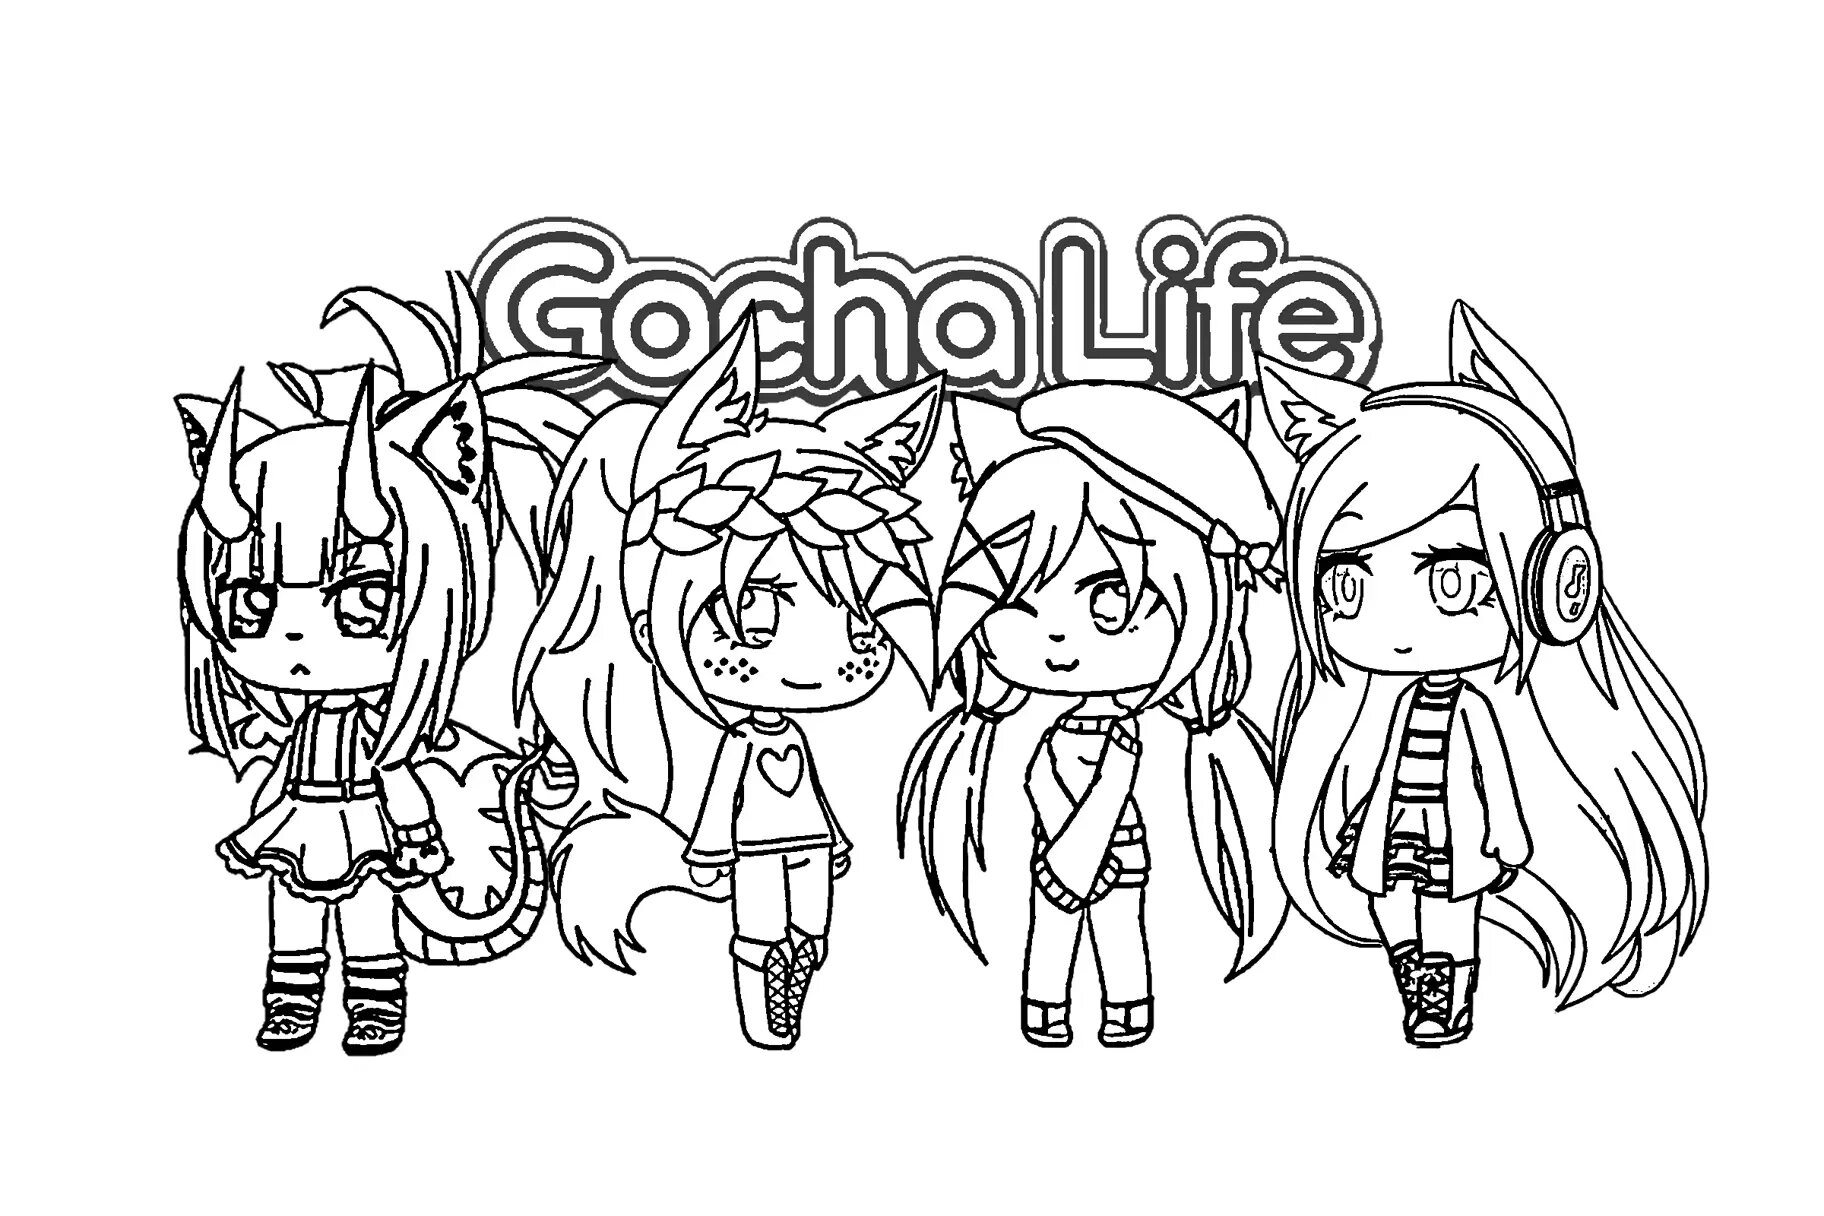 Vier Mädchen in Gacha Life Coloring Page